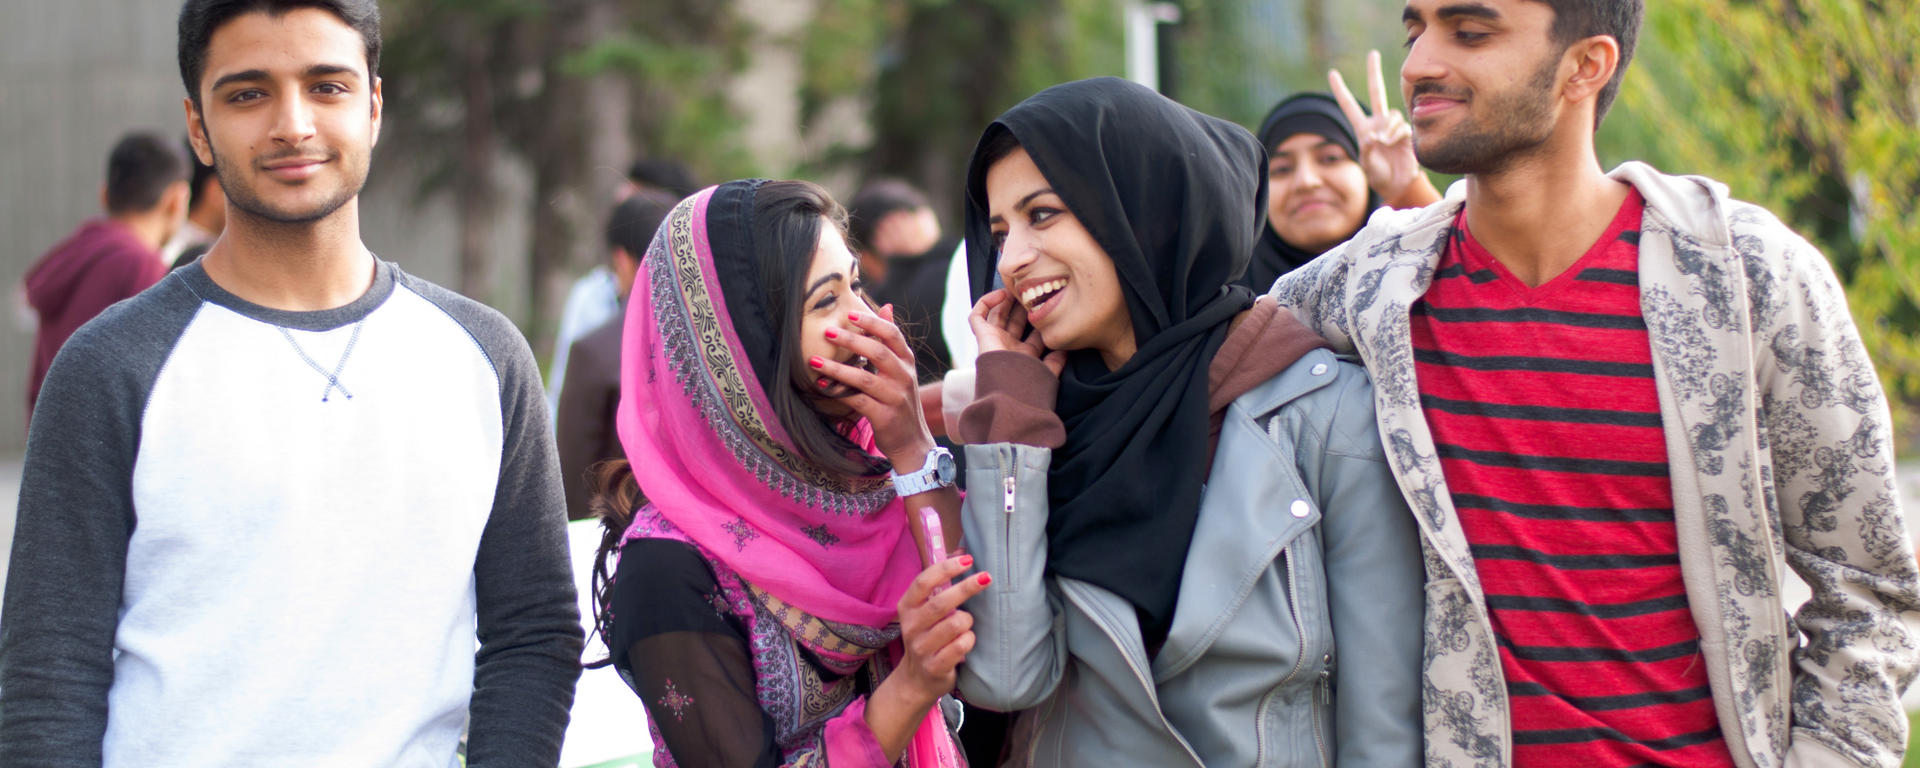 A group of students laughing and talking with one another on campus